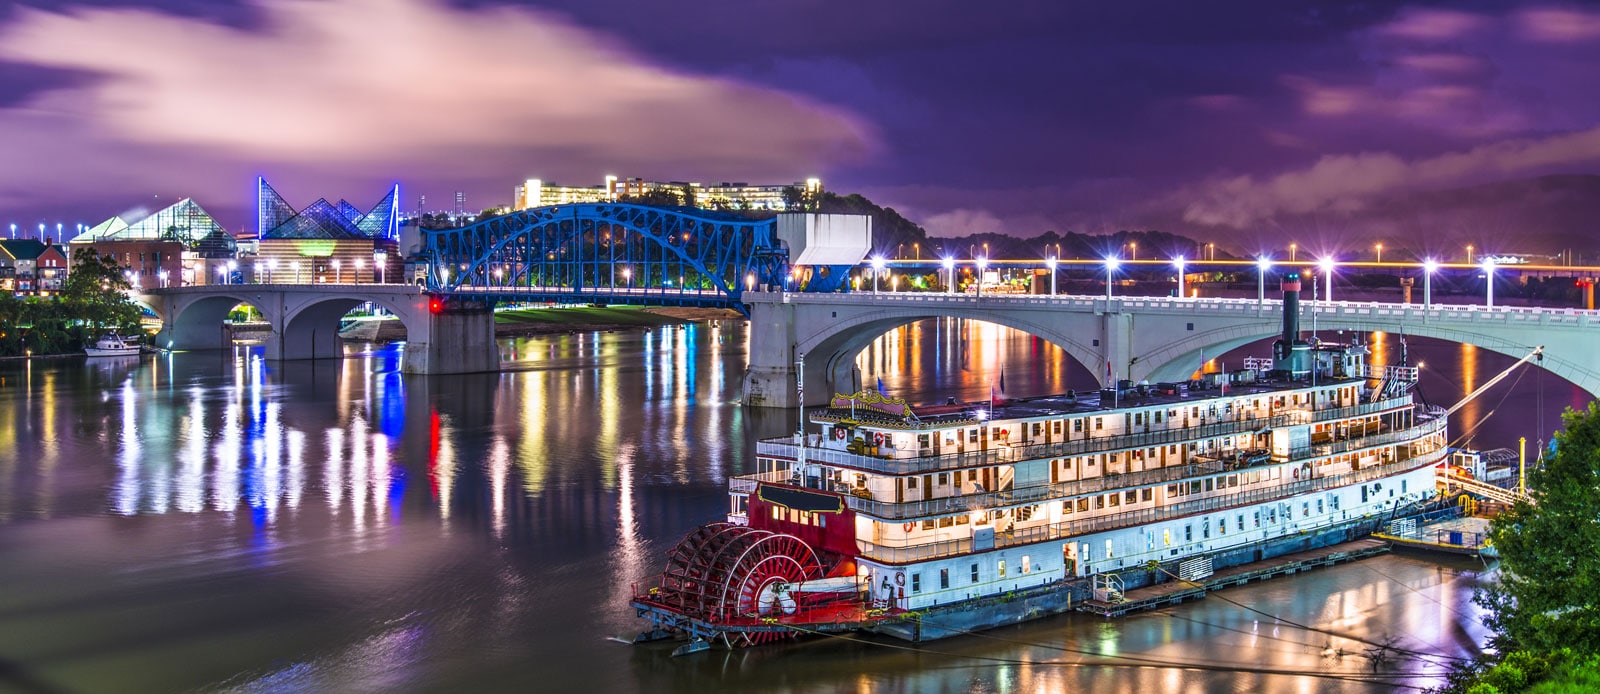 Book Now for these Top Events in Chattanooga for 2019Book Now for